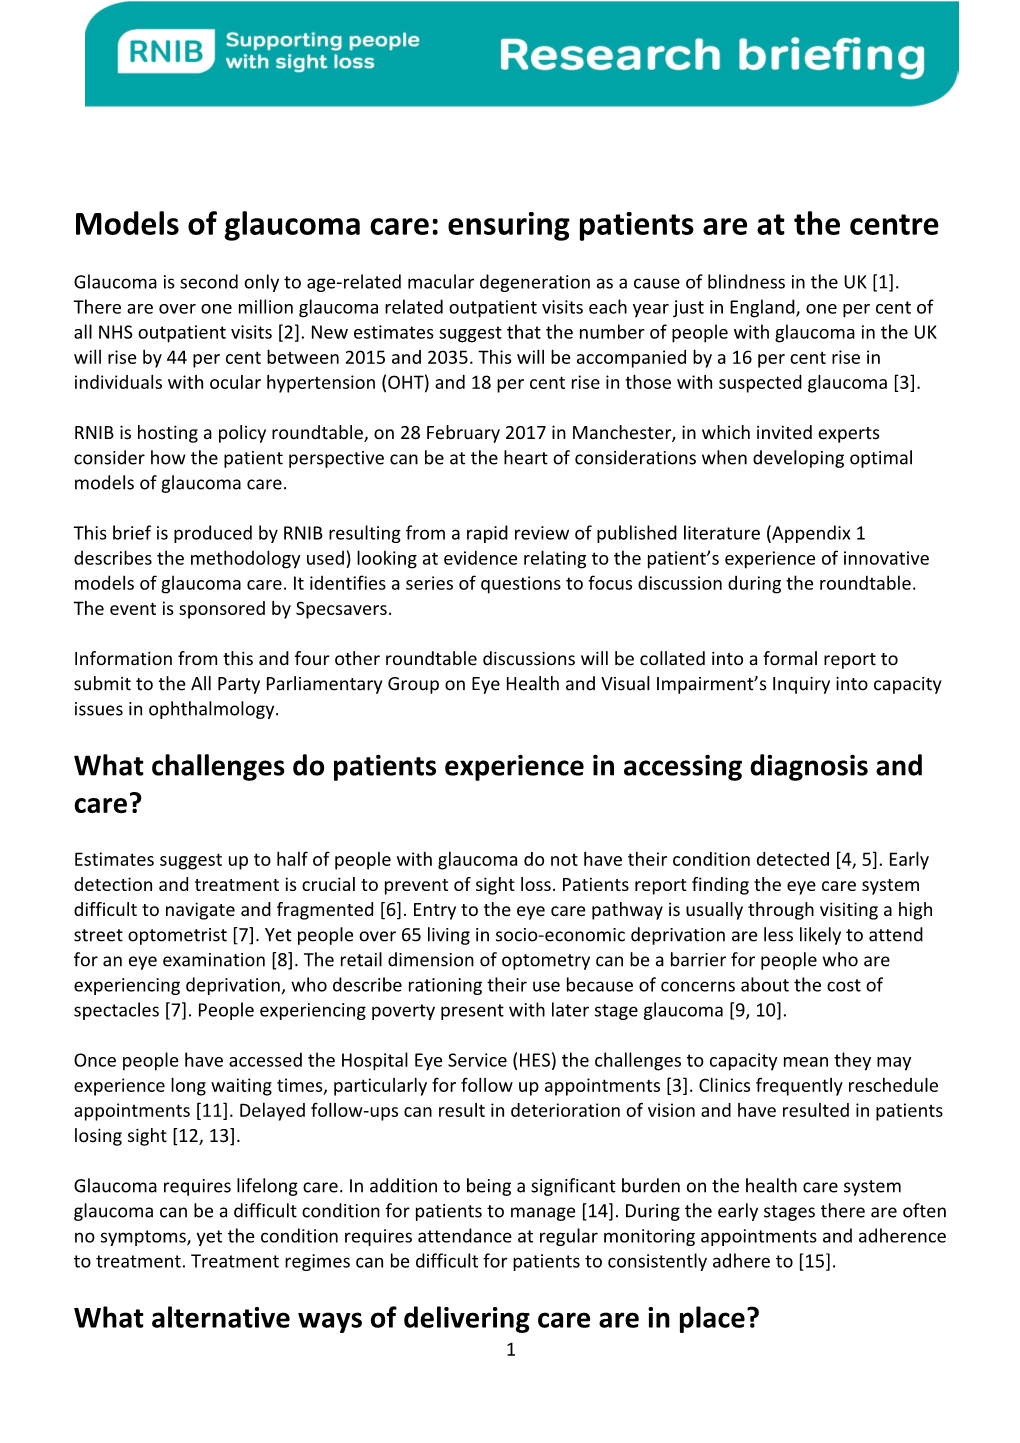 Models of Glaucoma Care: Ensuring Patients Are at the Centre